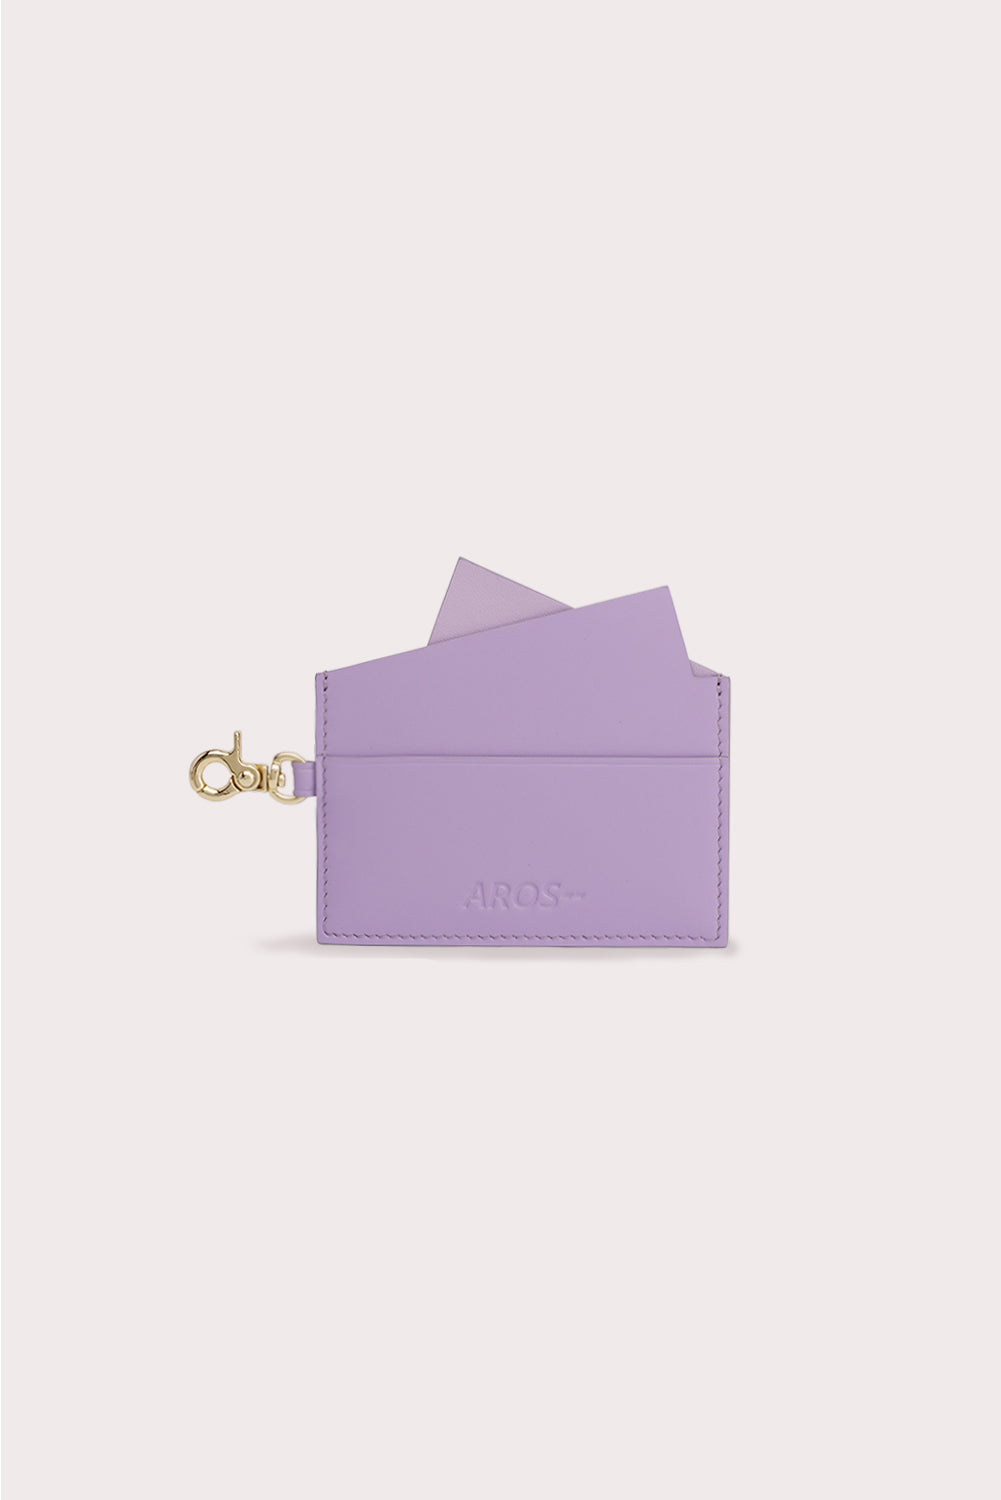 Easy Cardholder in Lilac - Aros